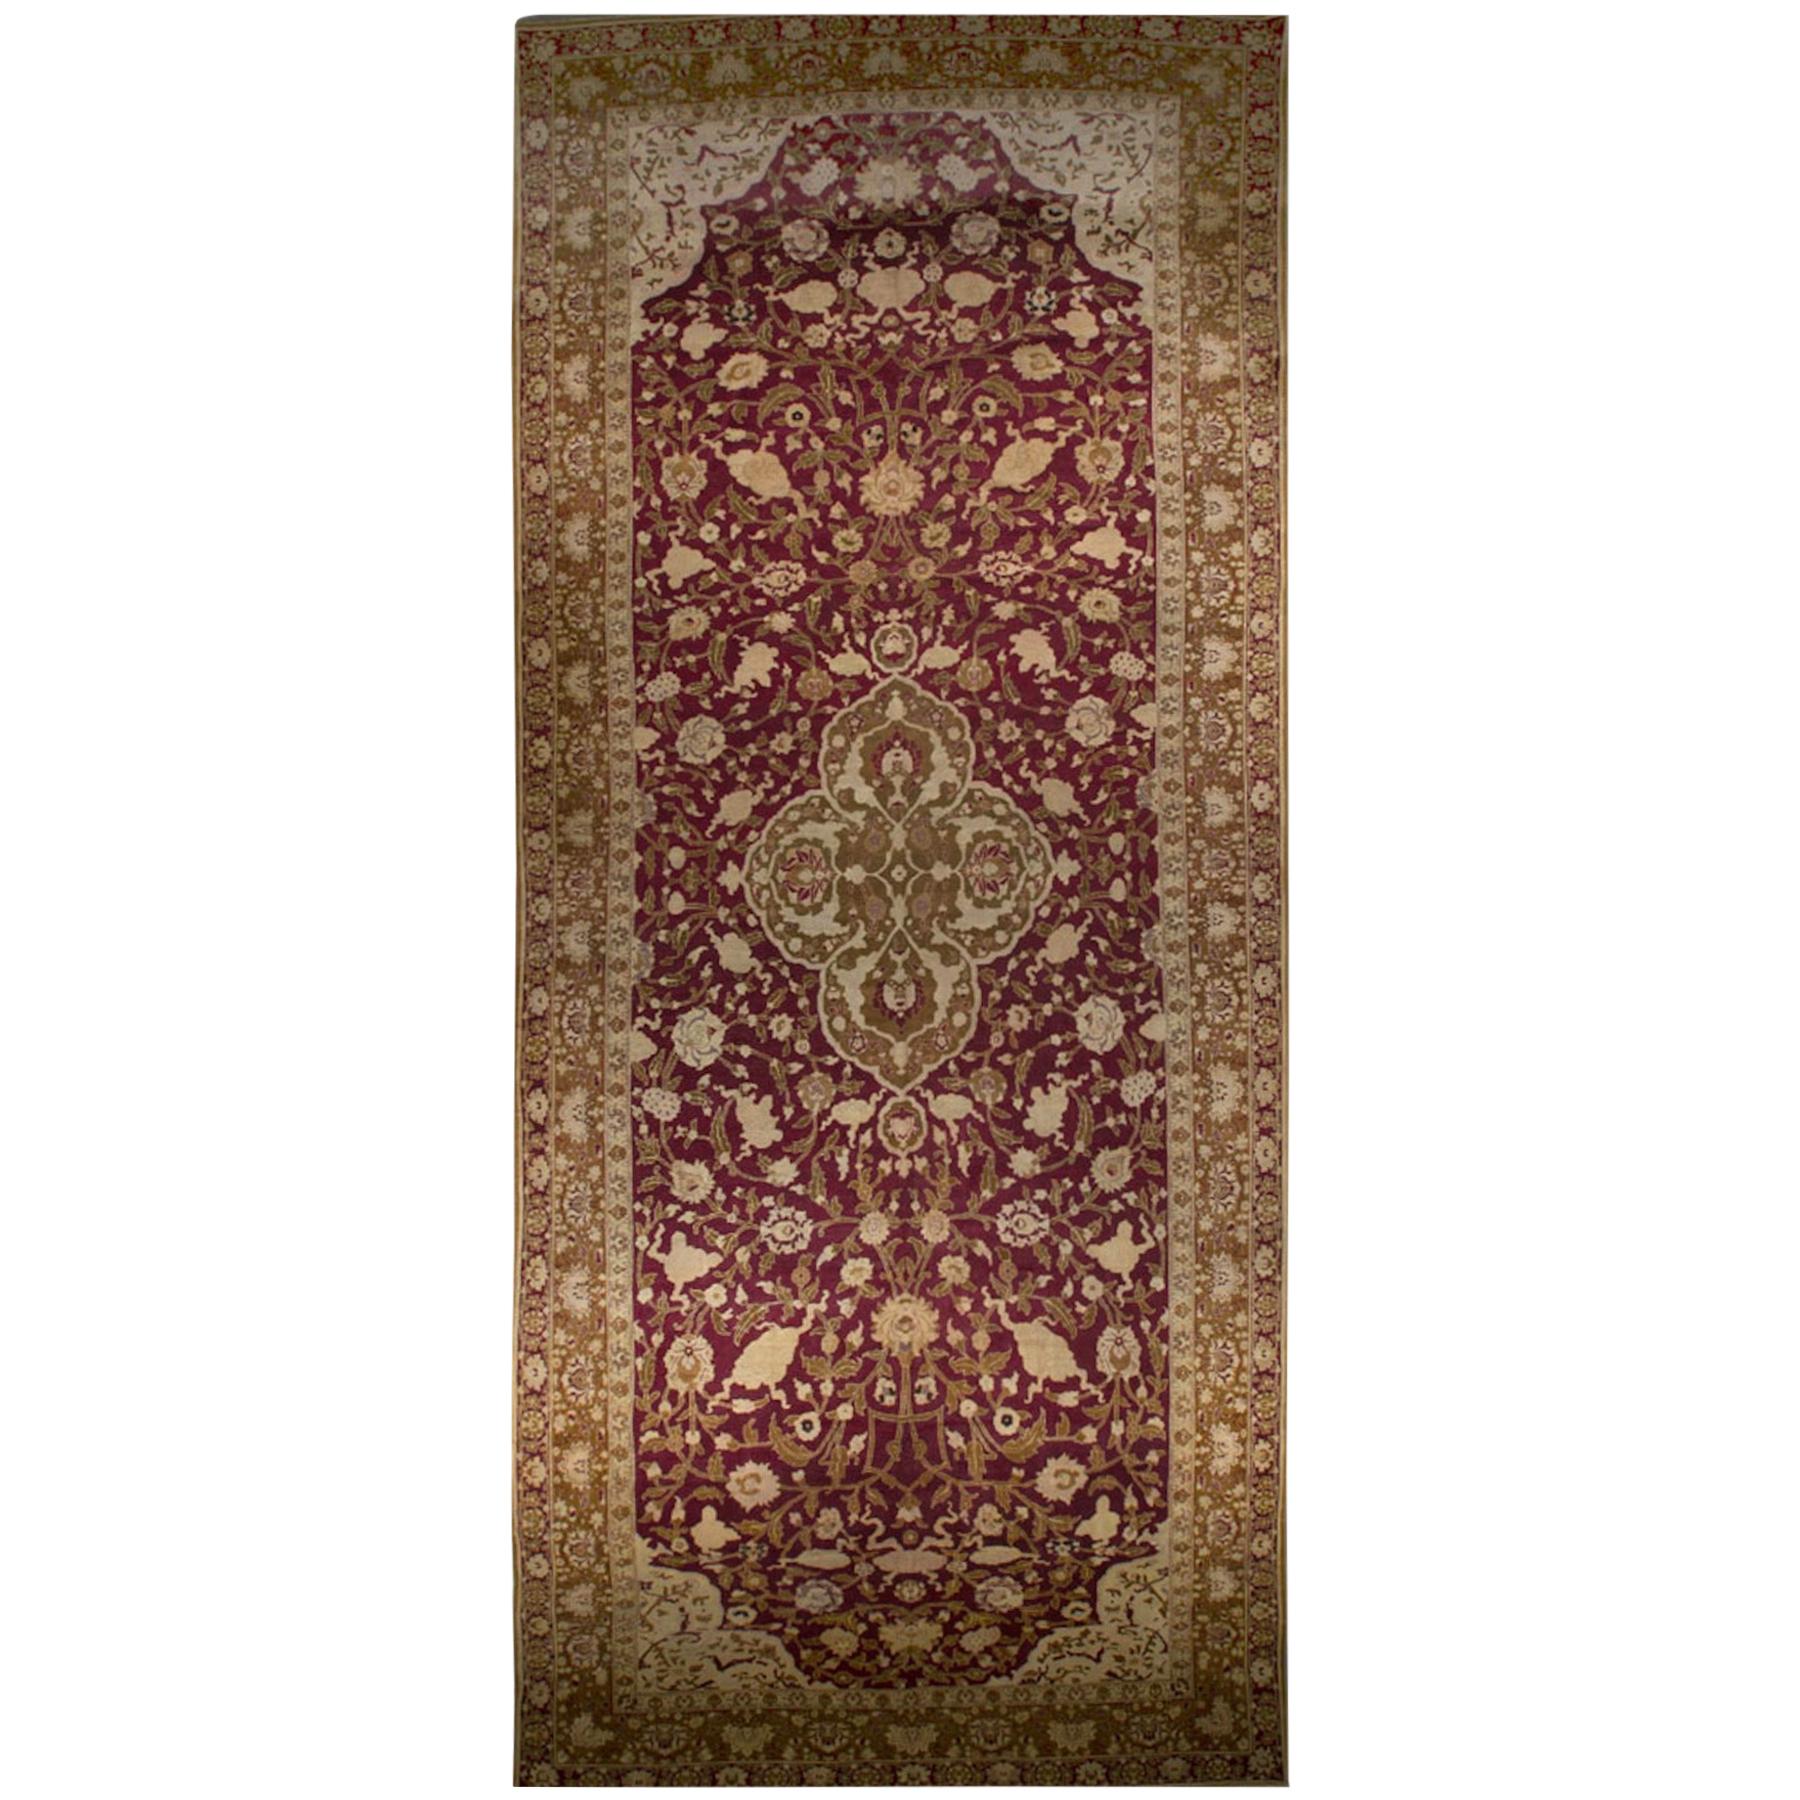 Antique Oversize Indian Agra Rug, circa 1890 14'0 x 33'2". For Sale